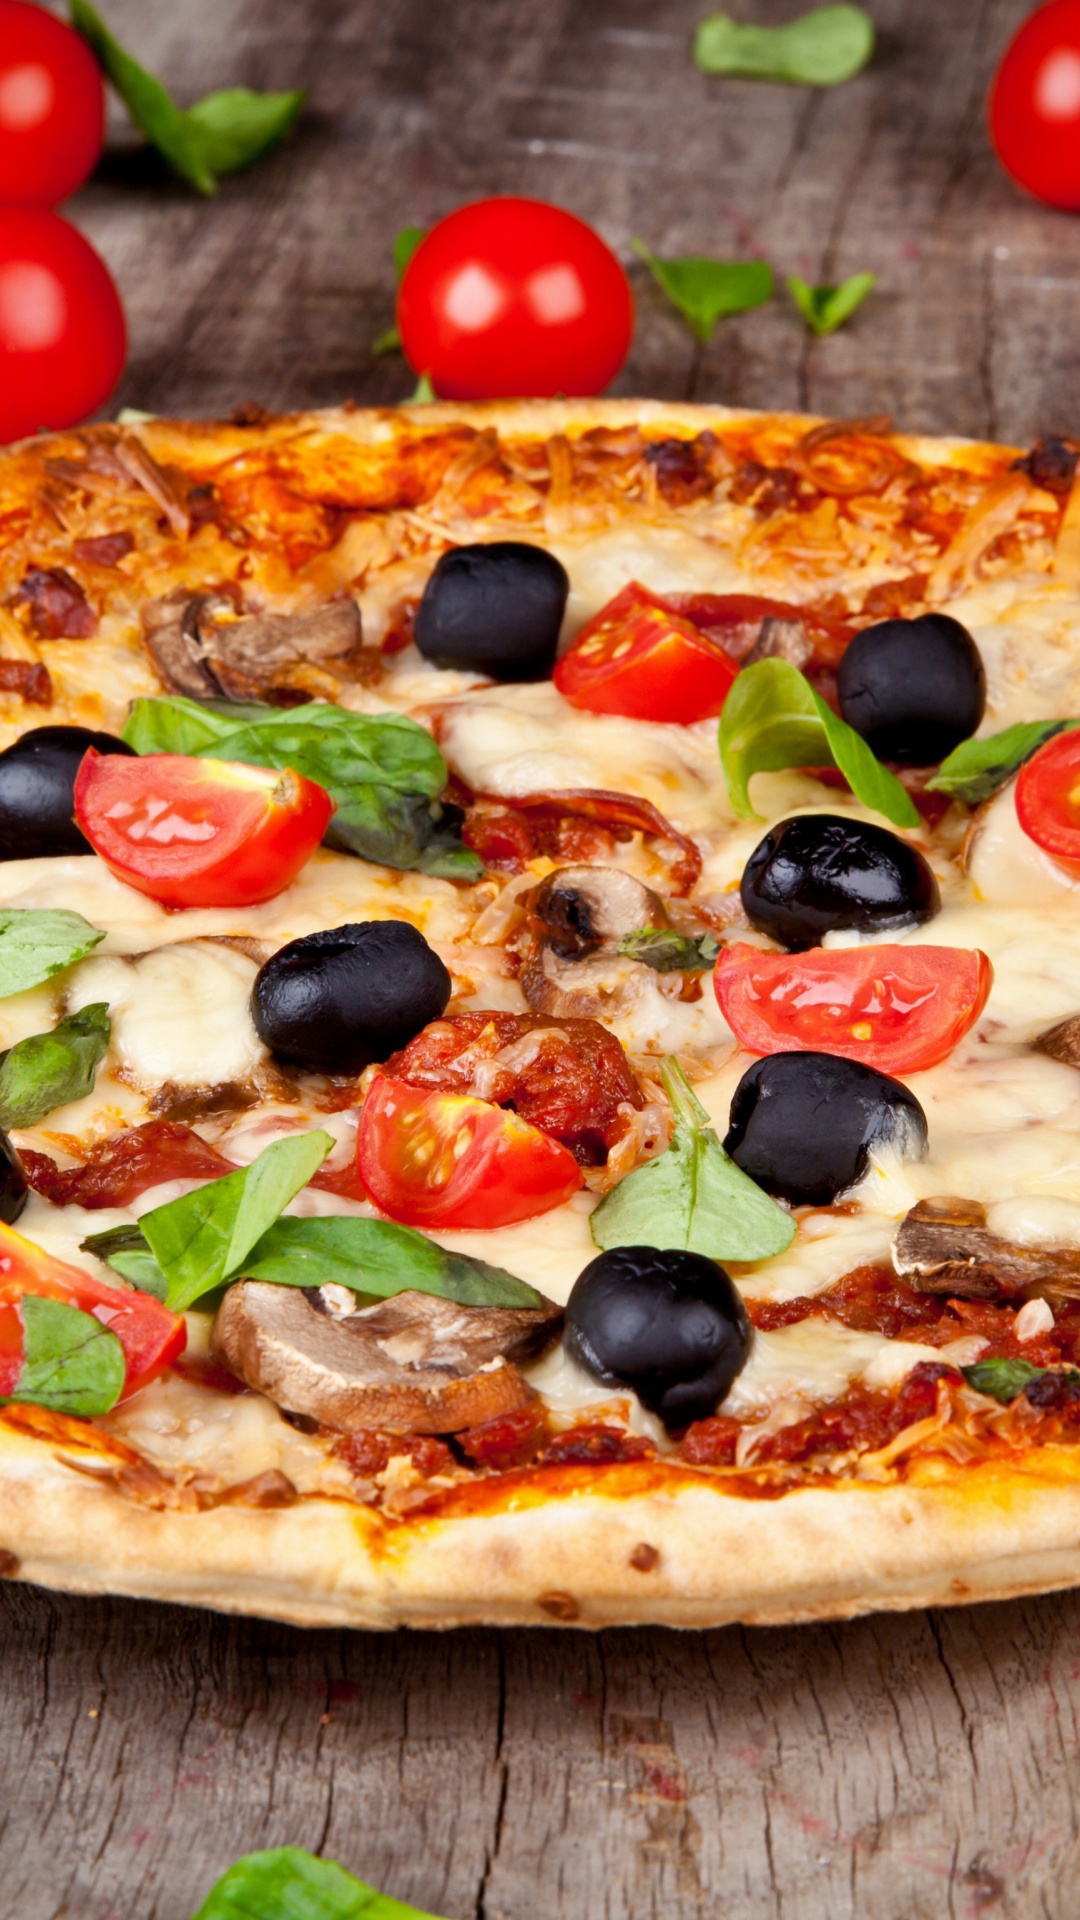 Das Pizza with tomatoes and olives Wallpaper 1080x1920